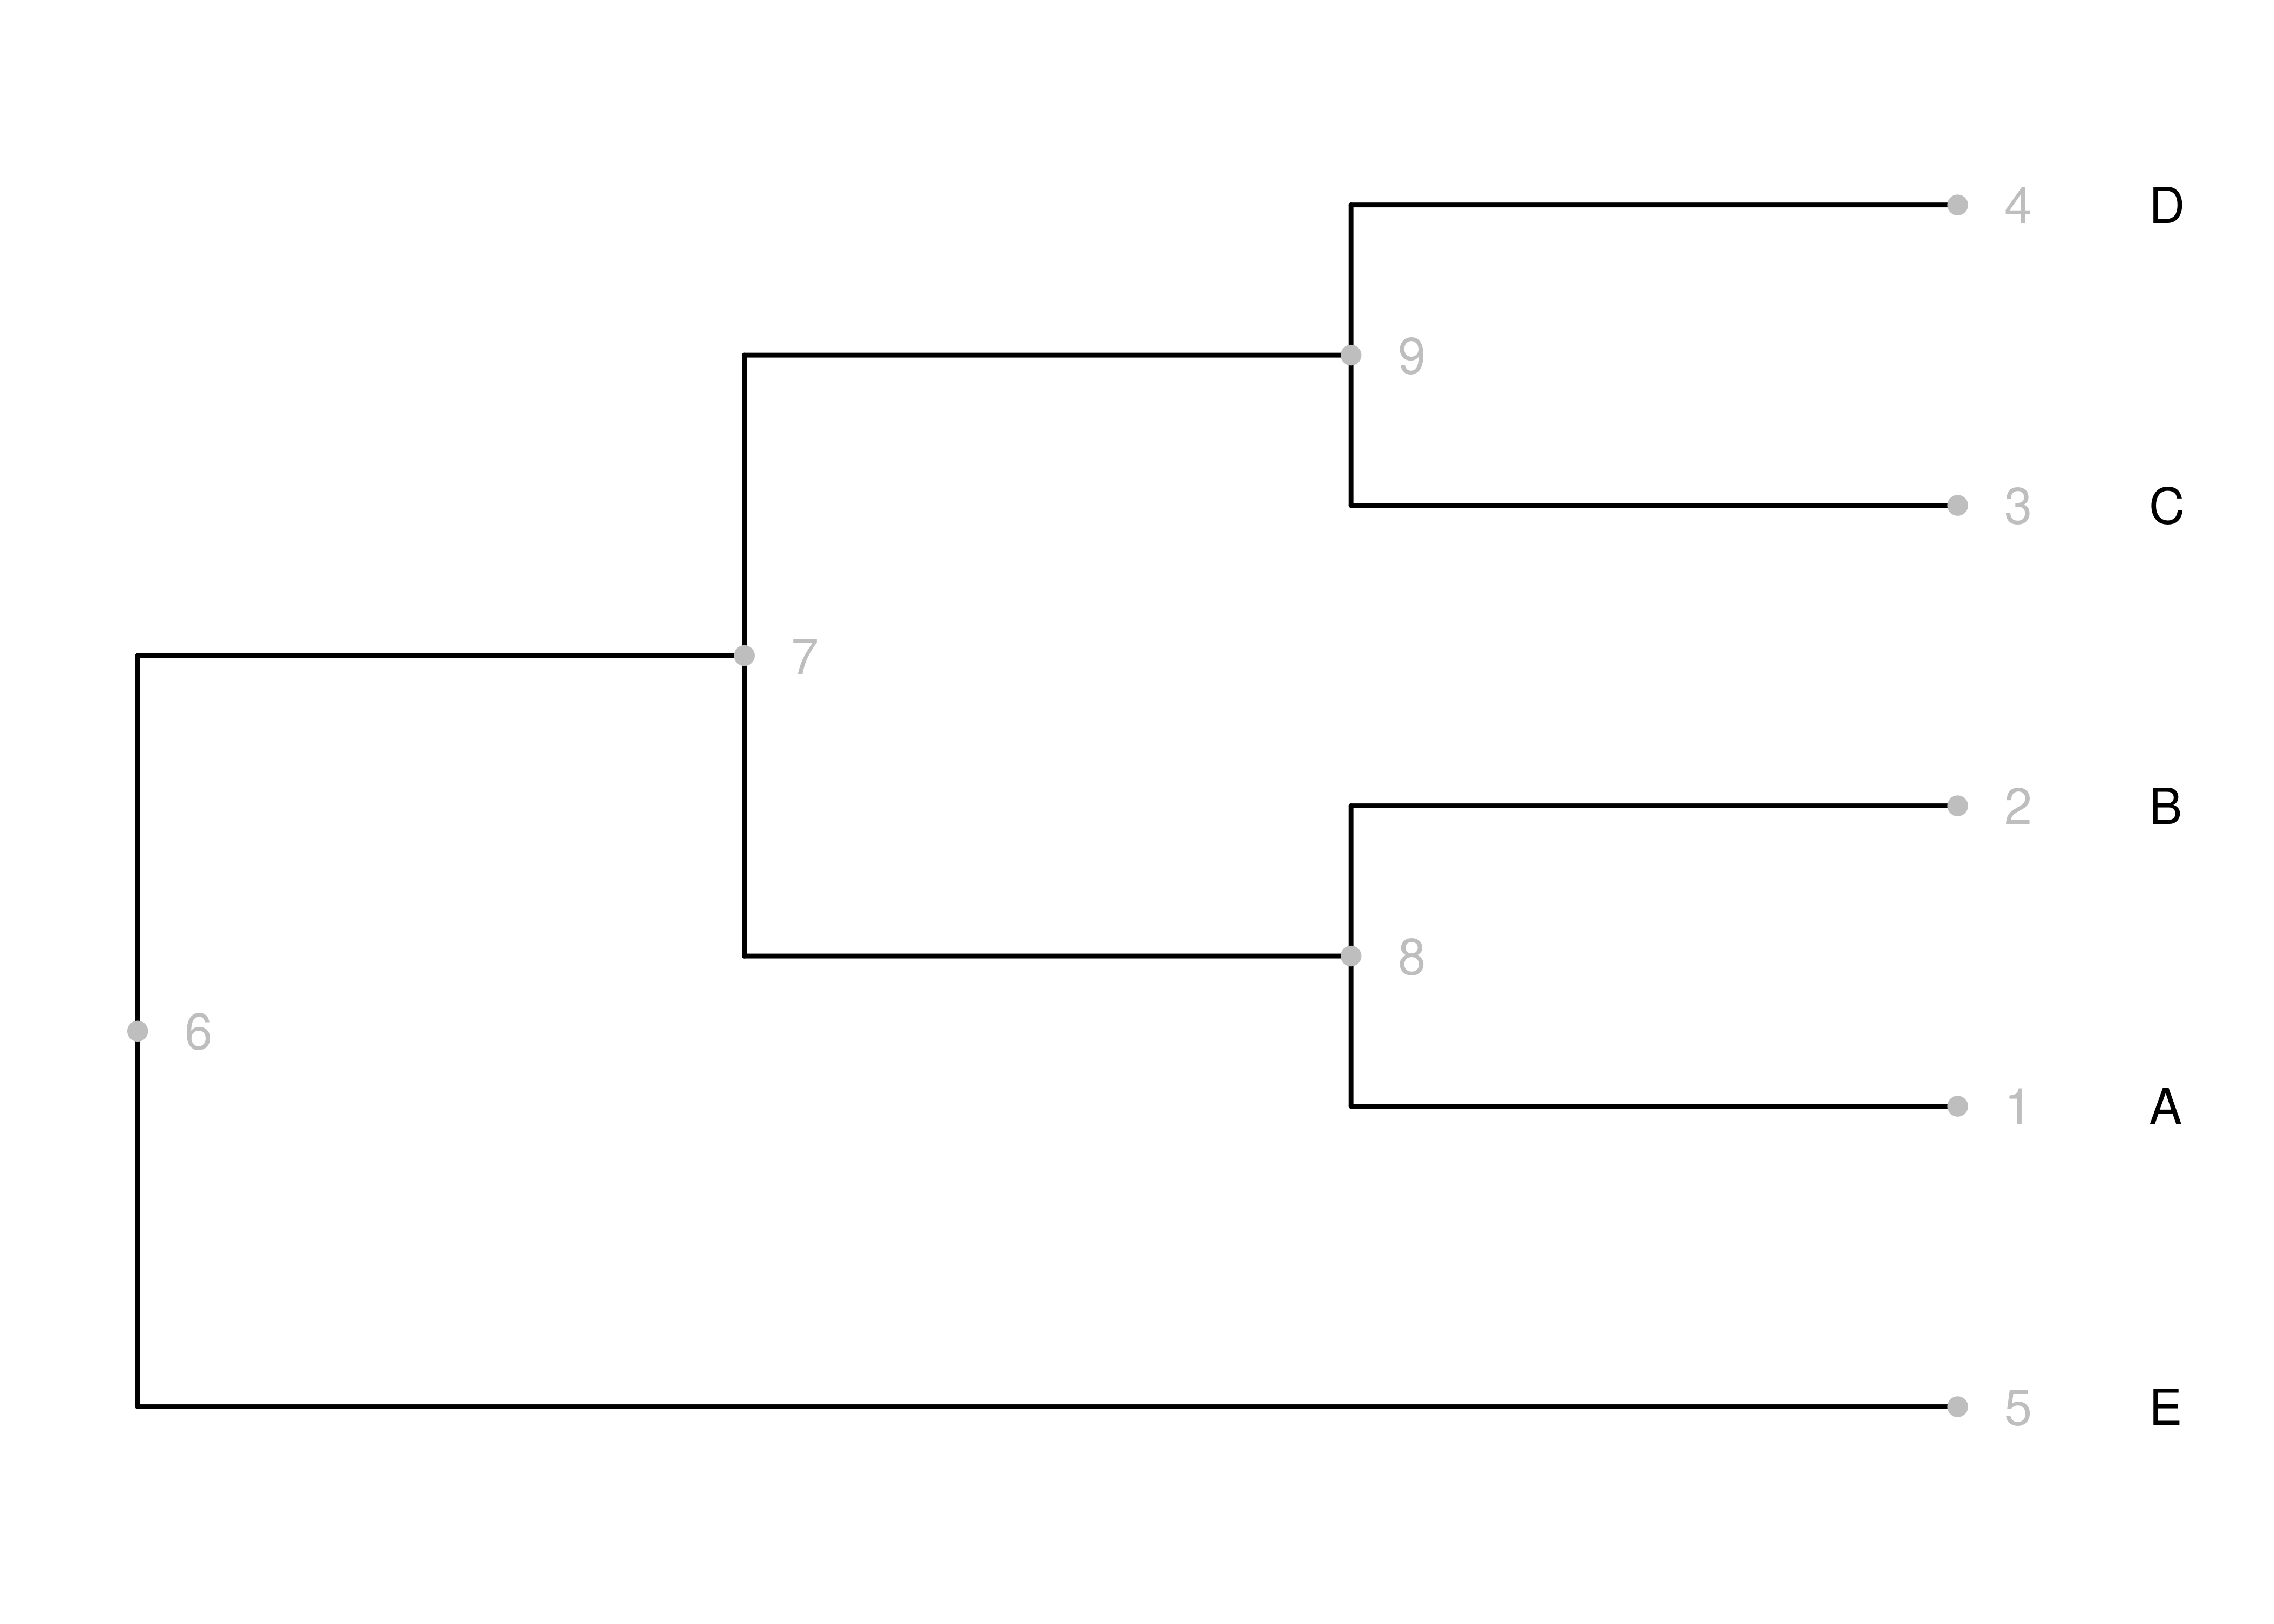 A cladogram. Nodes and node numbers are gray, and branches are black.